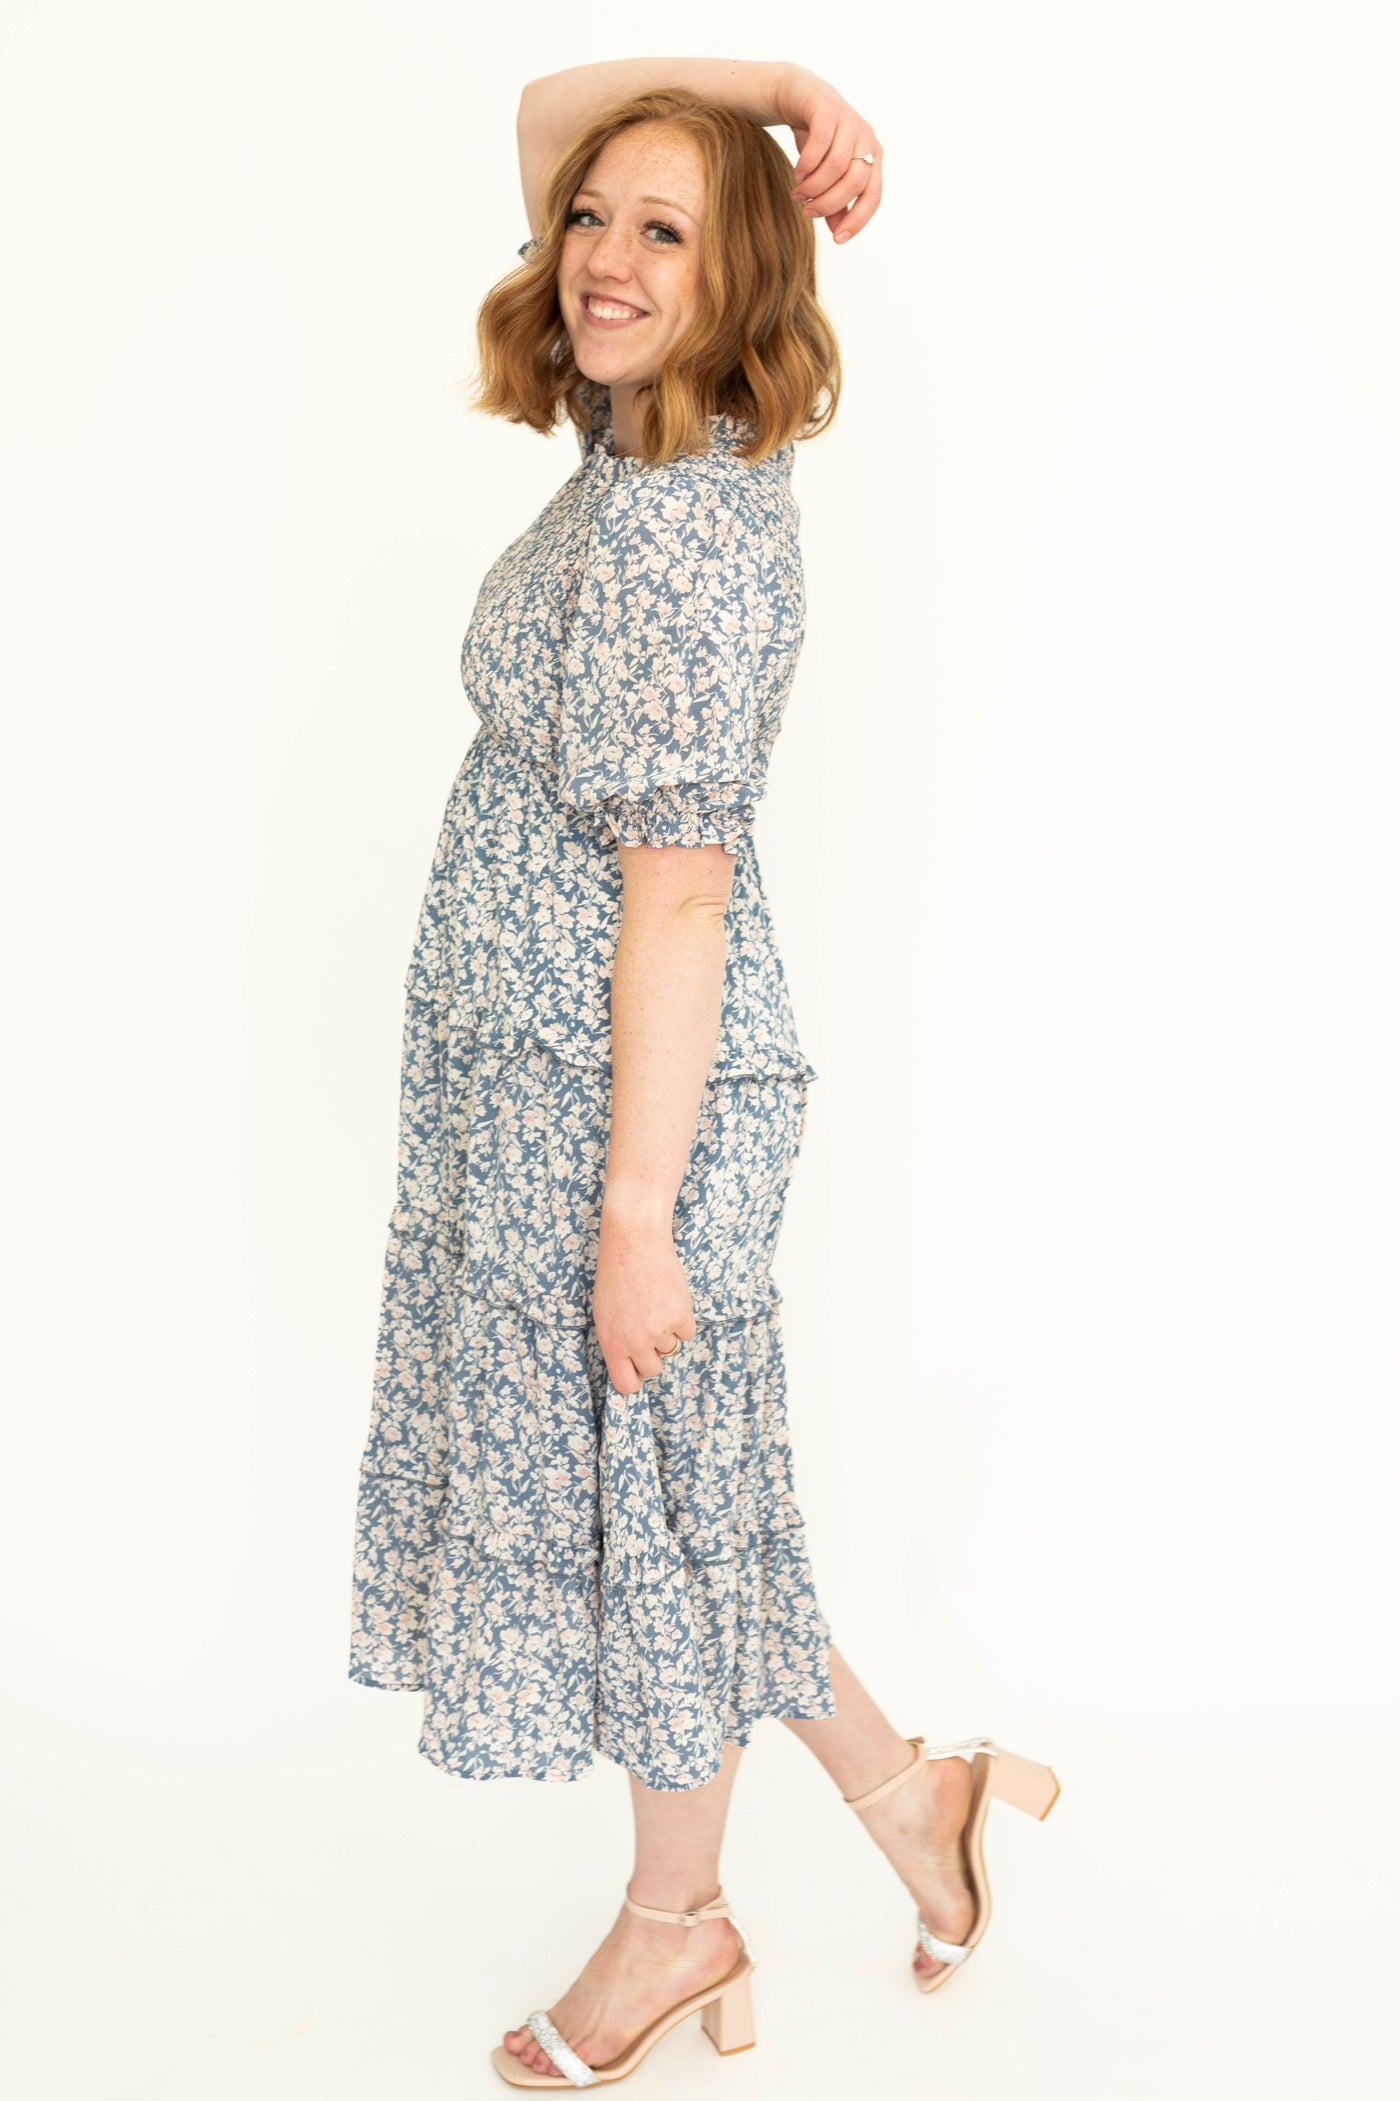 Short sleeve blue floral dress with tiered skirt